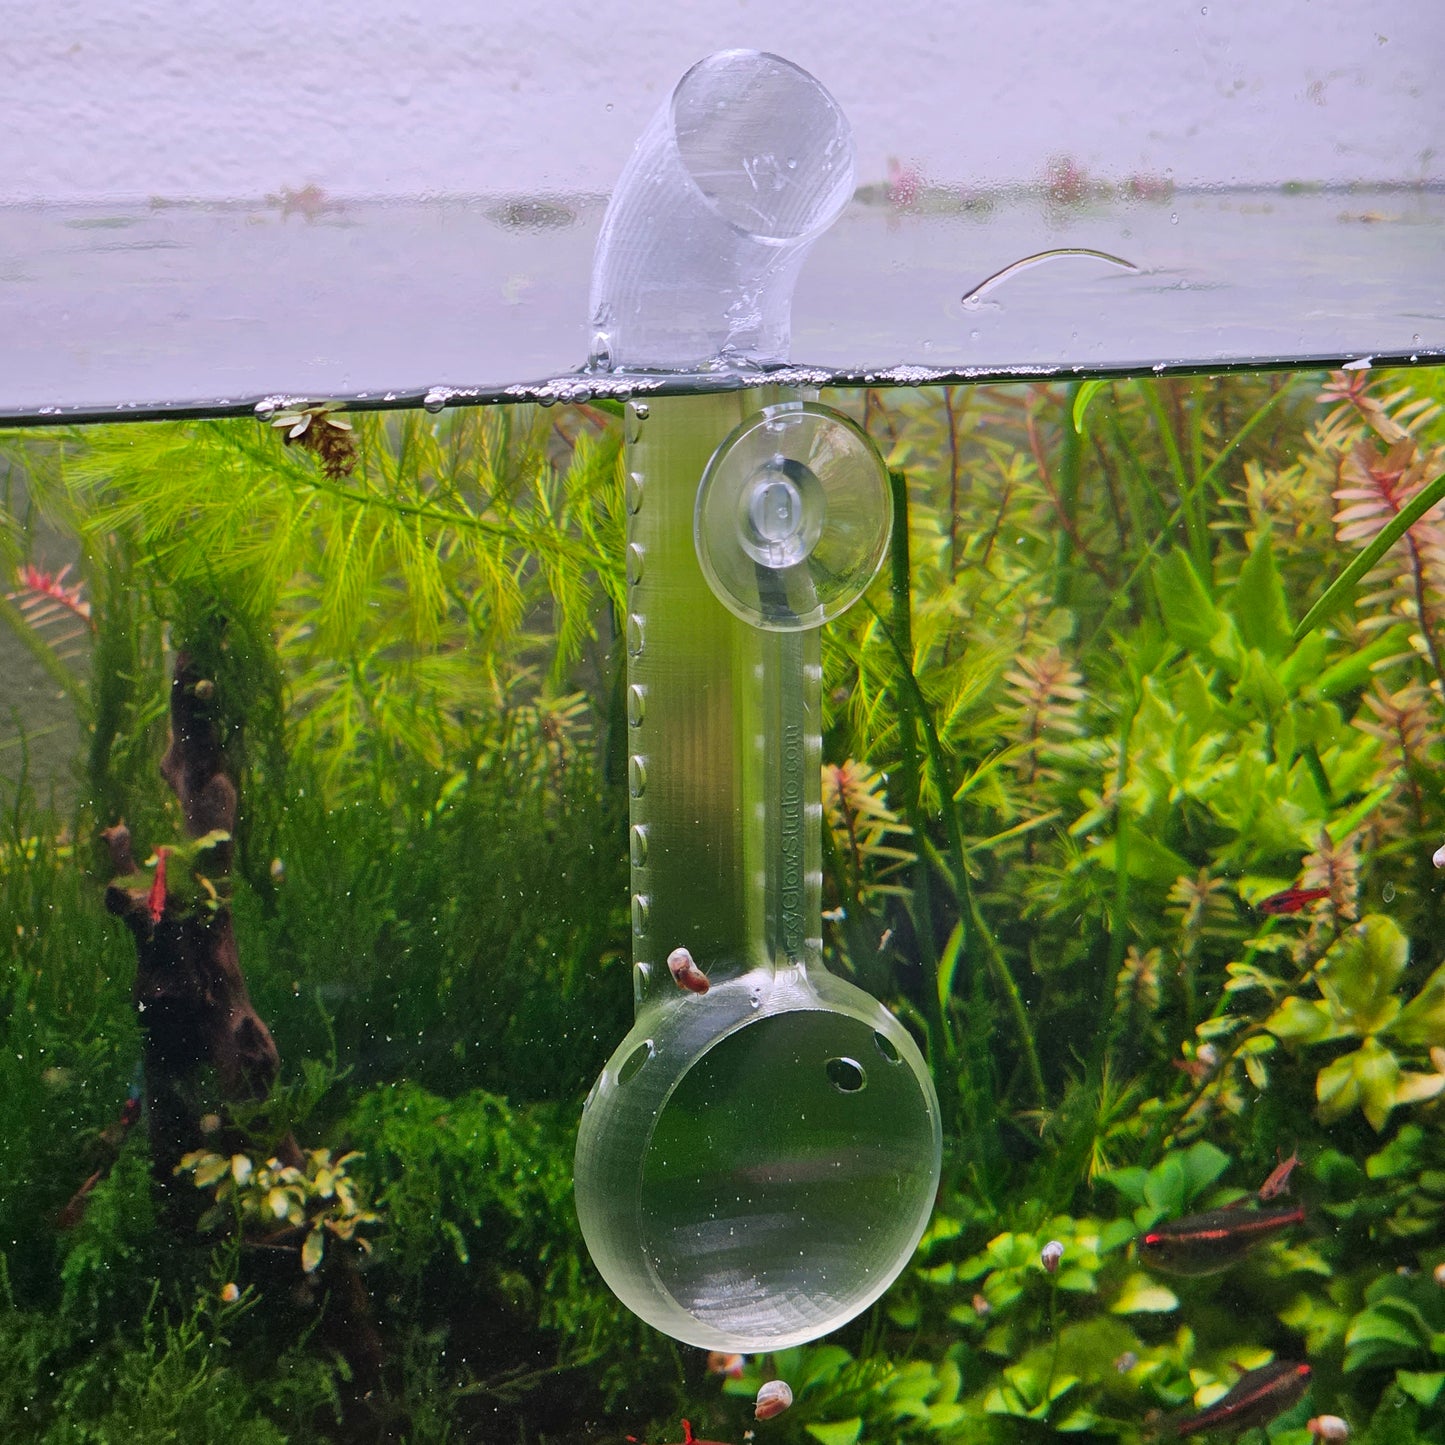 Shrimp Feeder and Viewing Platform - For Shrimp feeding, viewing, study, & photography! Clear Version - Glass like! - 3D Printed Plastic